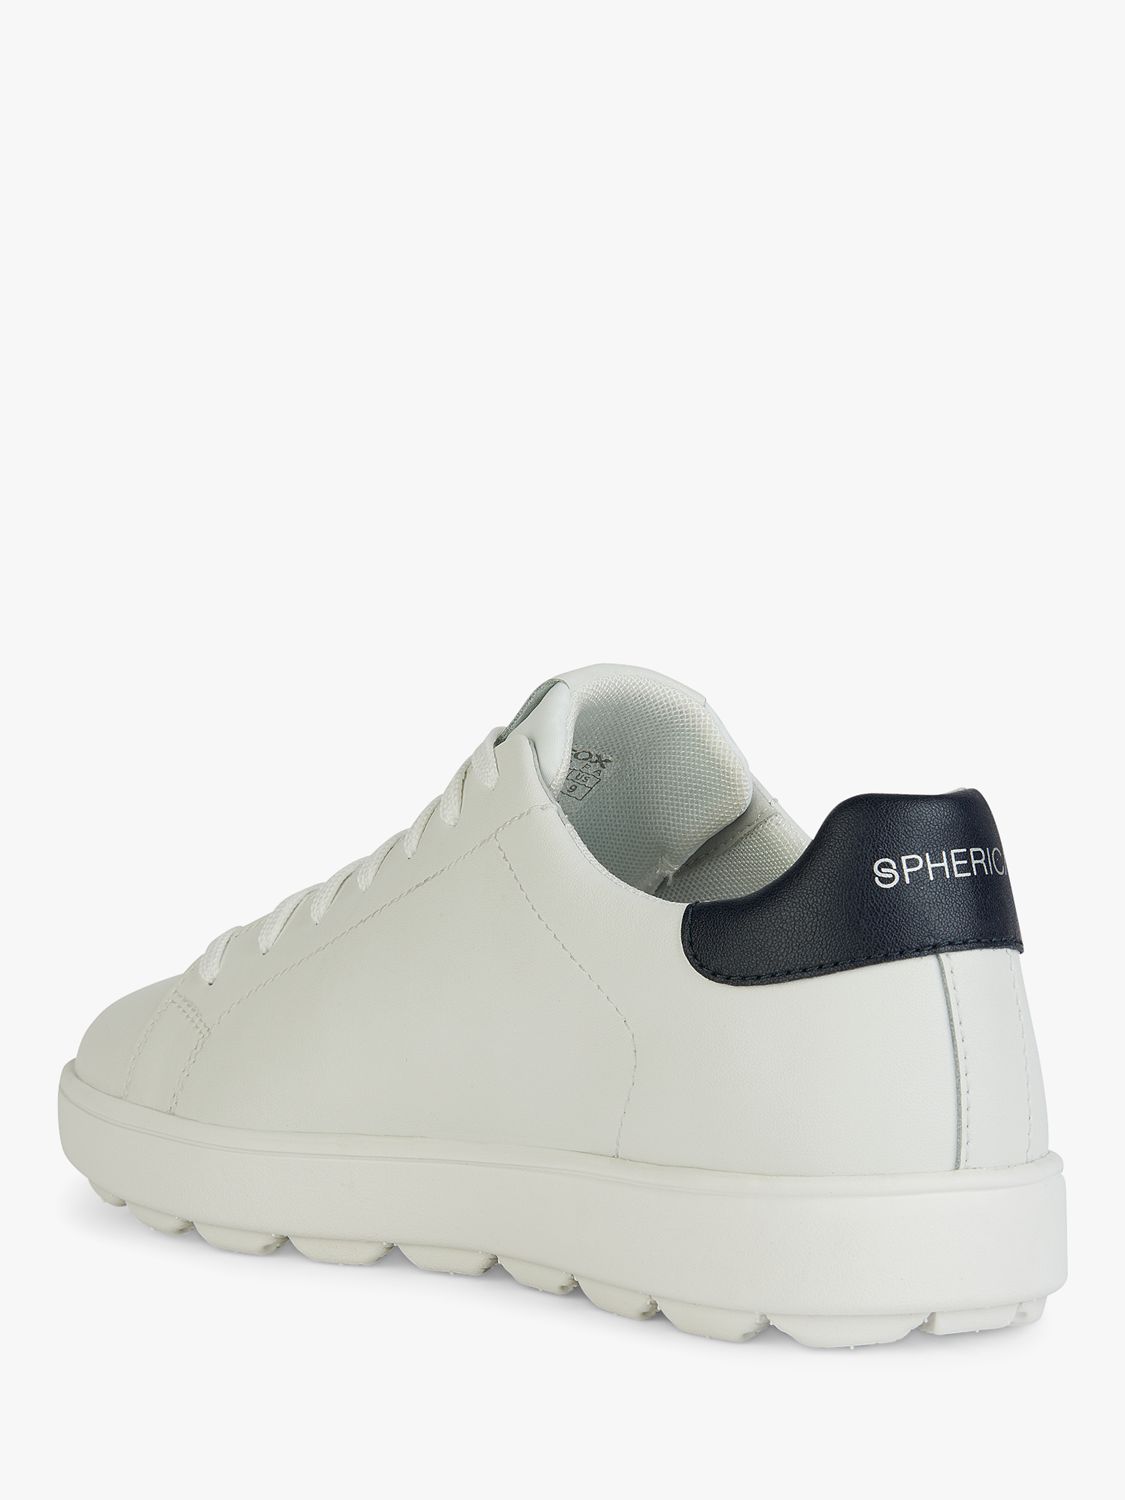 Buy Geox Spherica ECUB-1 Leather Trainers, White/Navy Online at johnlewis.com